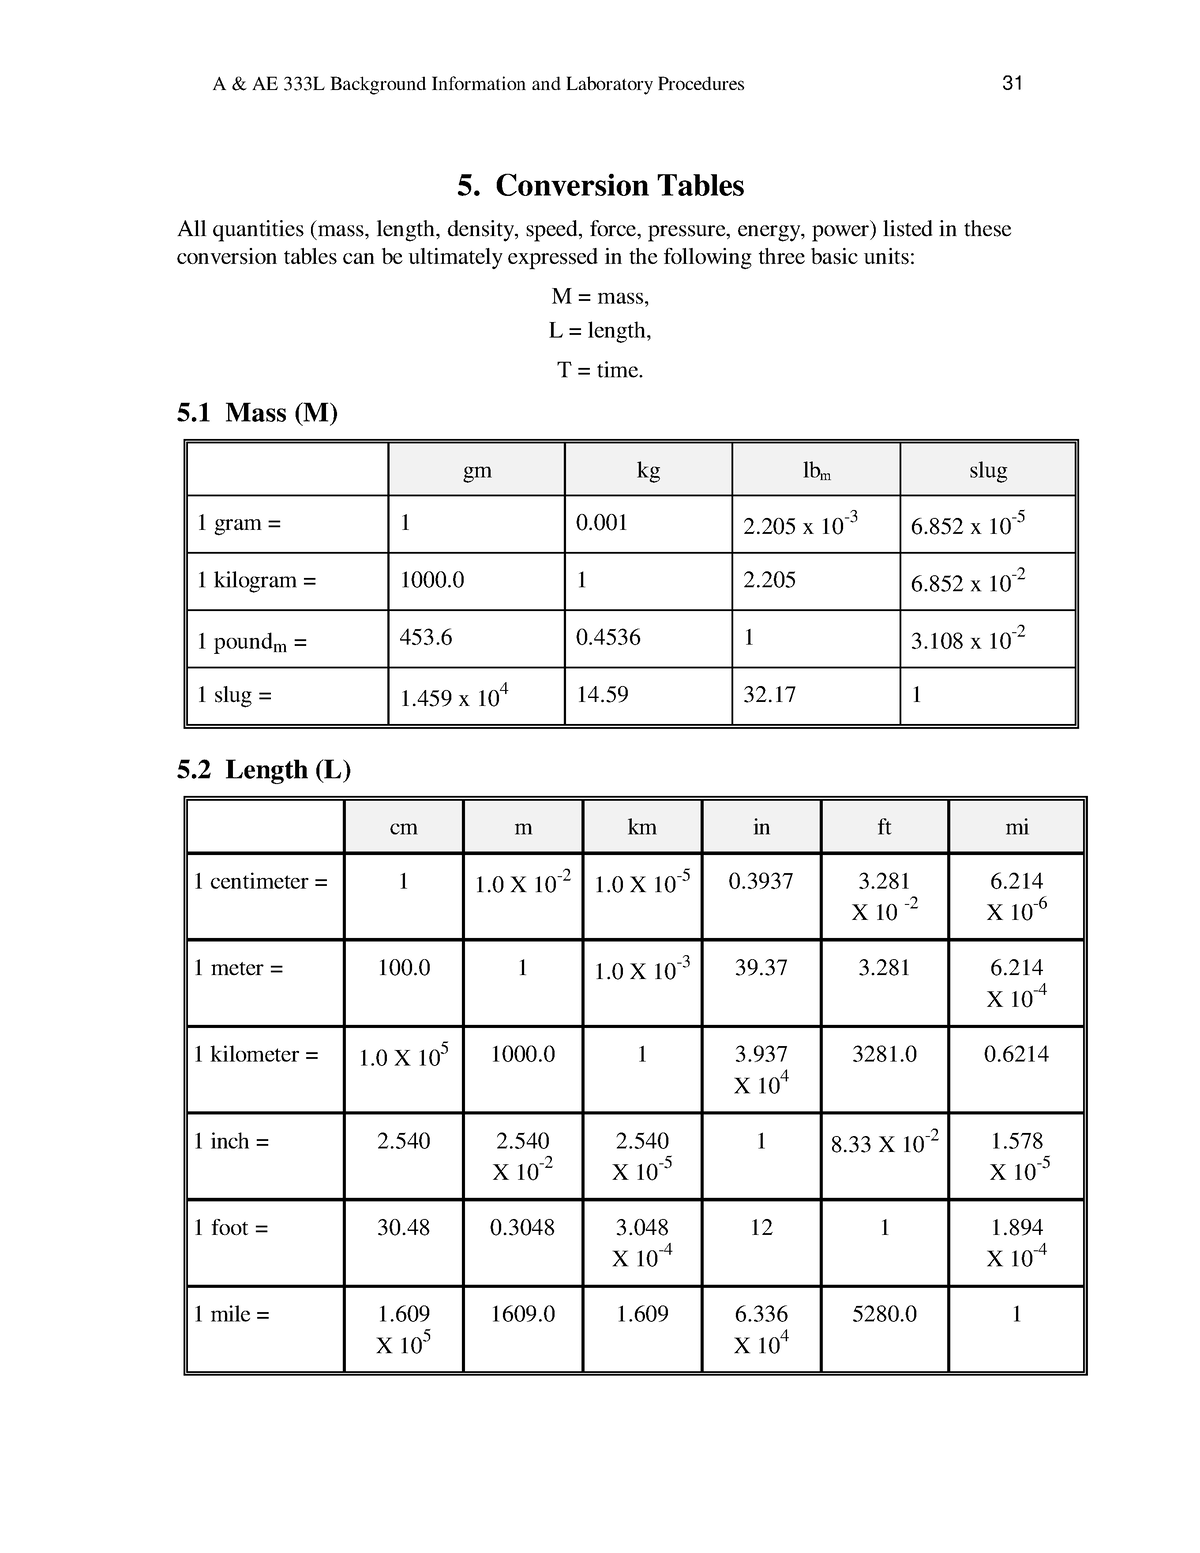 Conversion-table - Conversion Table - 5. Conversion Tables All ...